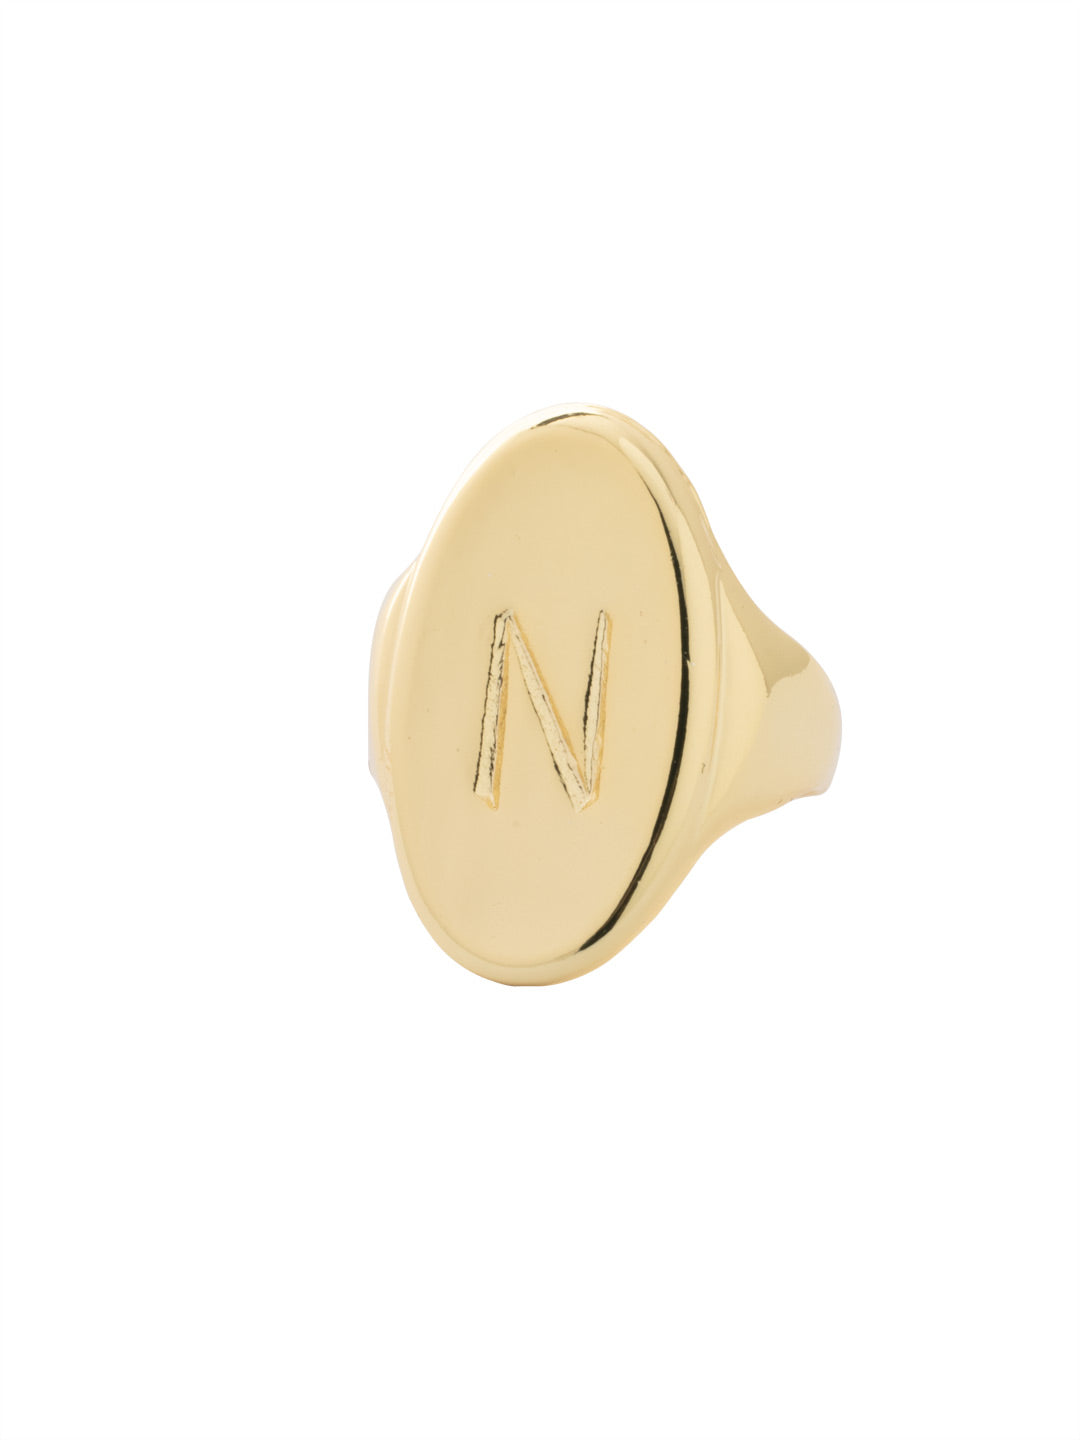 Product Image: "N" Signet Statement Ring